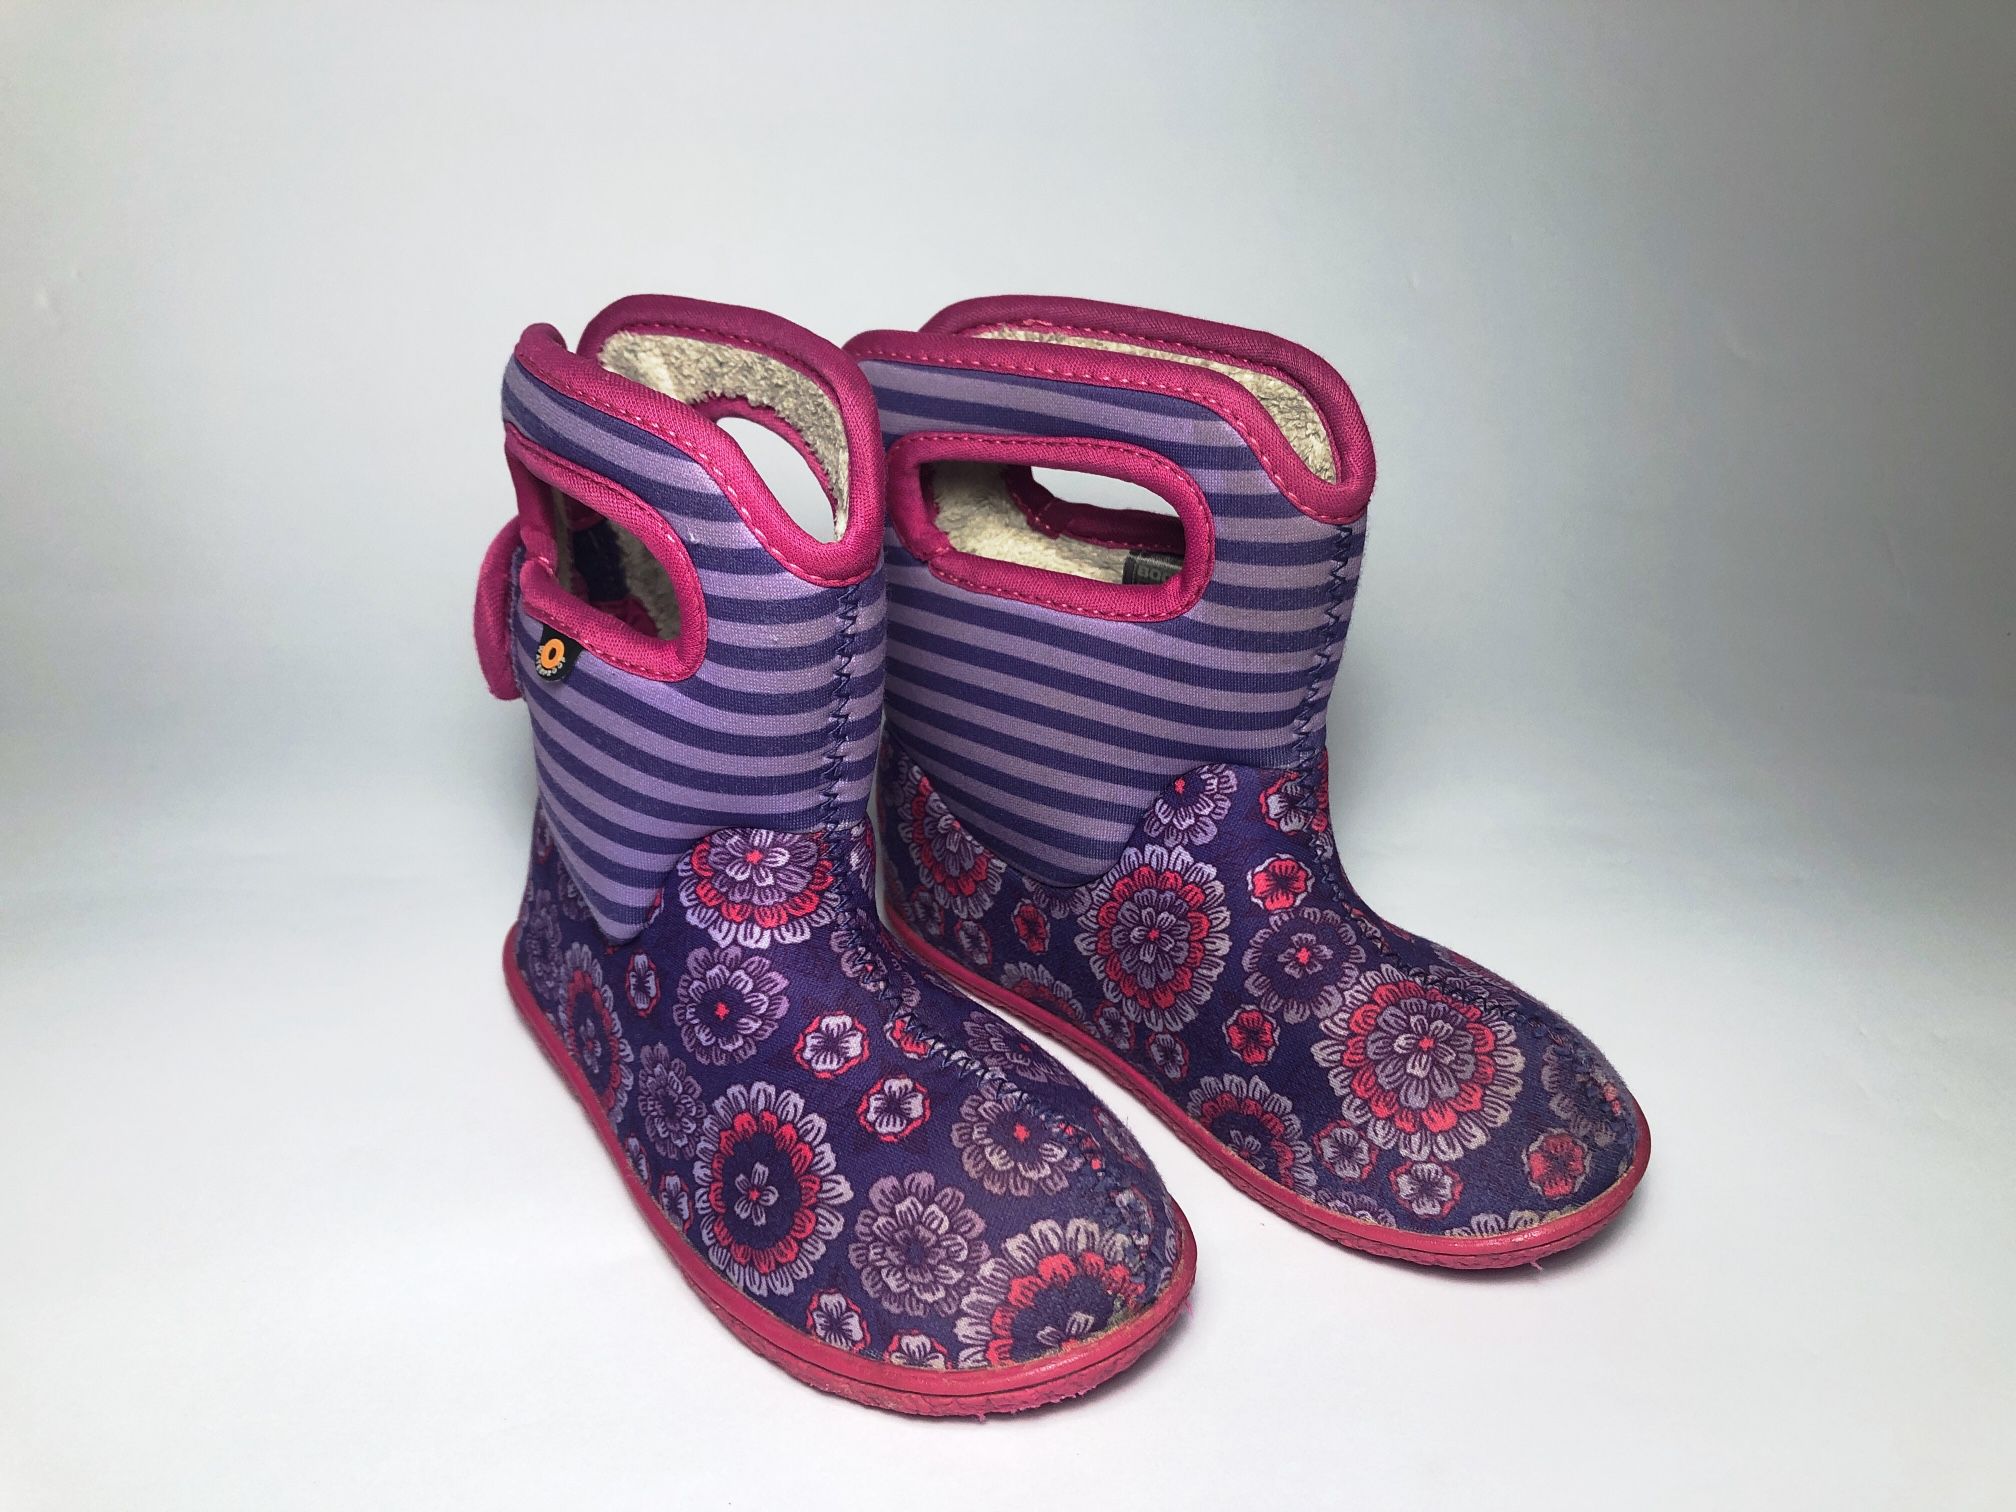 Baby Bogs Pansy Violet Multi Girls Kids Size 9 Insulated Winter Snow Boots